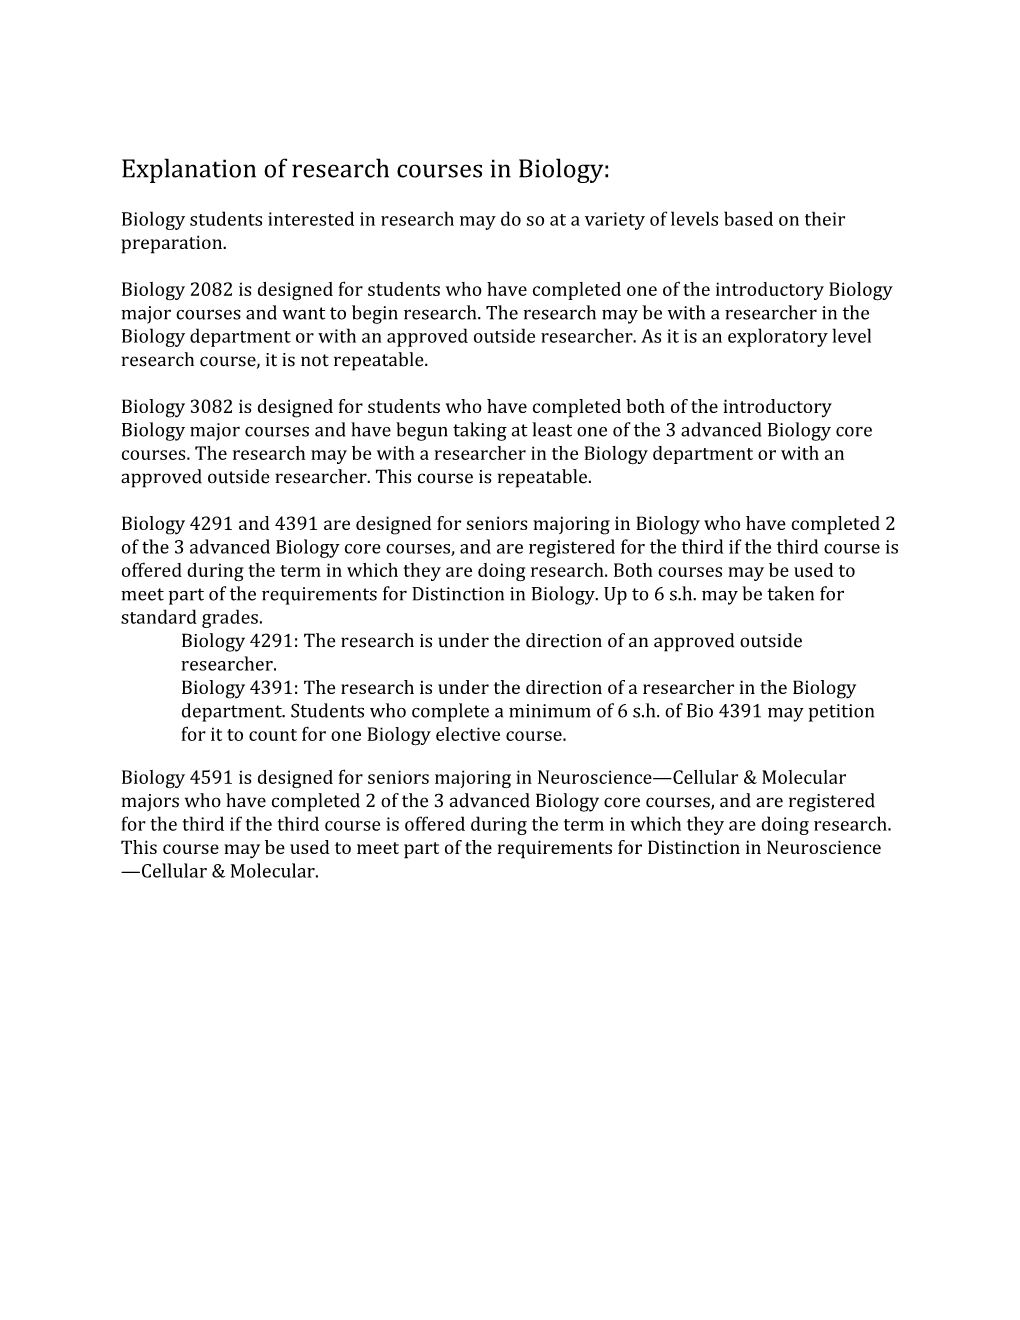 Explanation of Research Courses in Biology